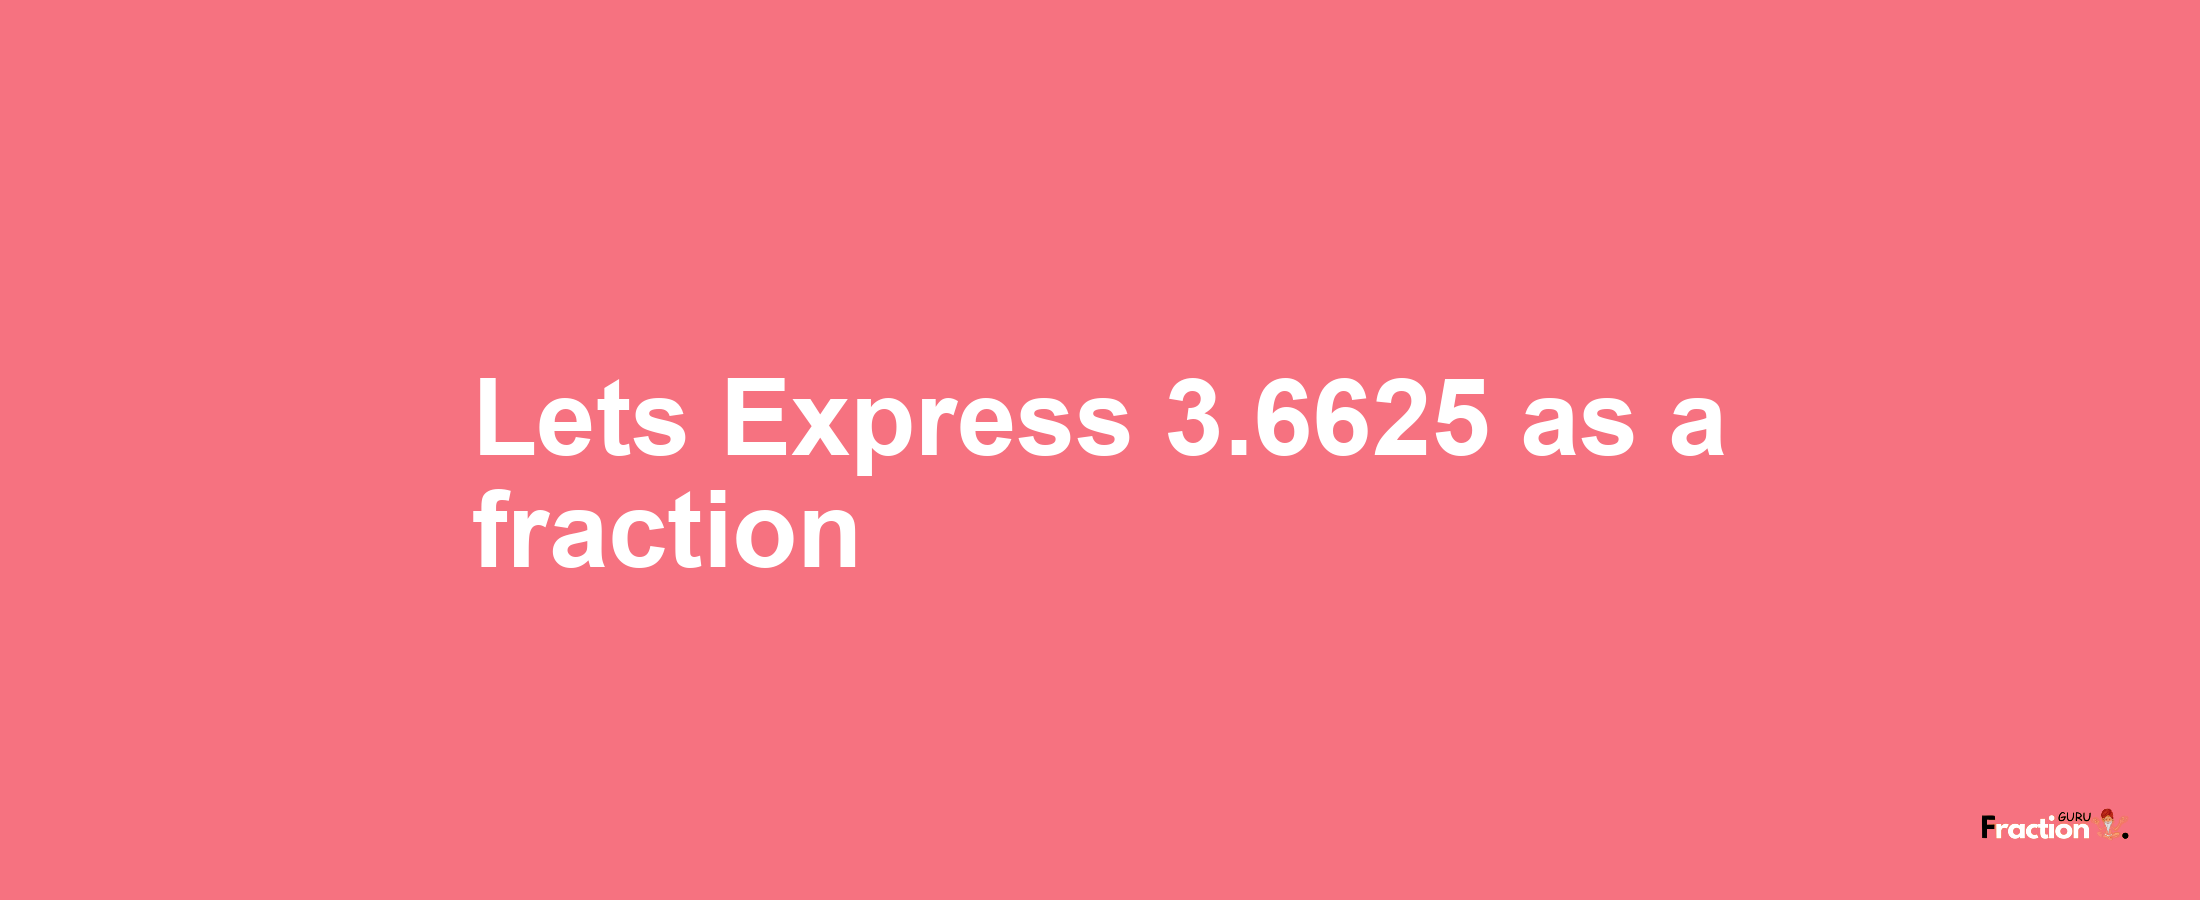 Lets Express 3.6625 as afraction